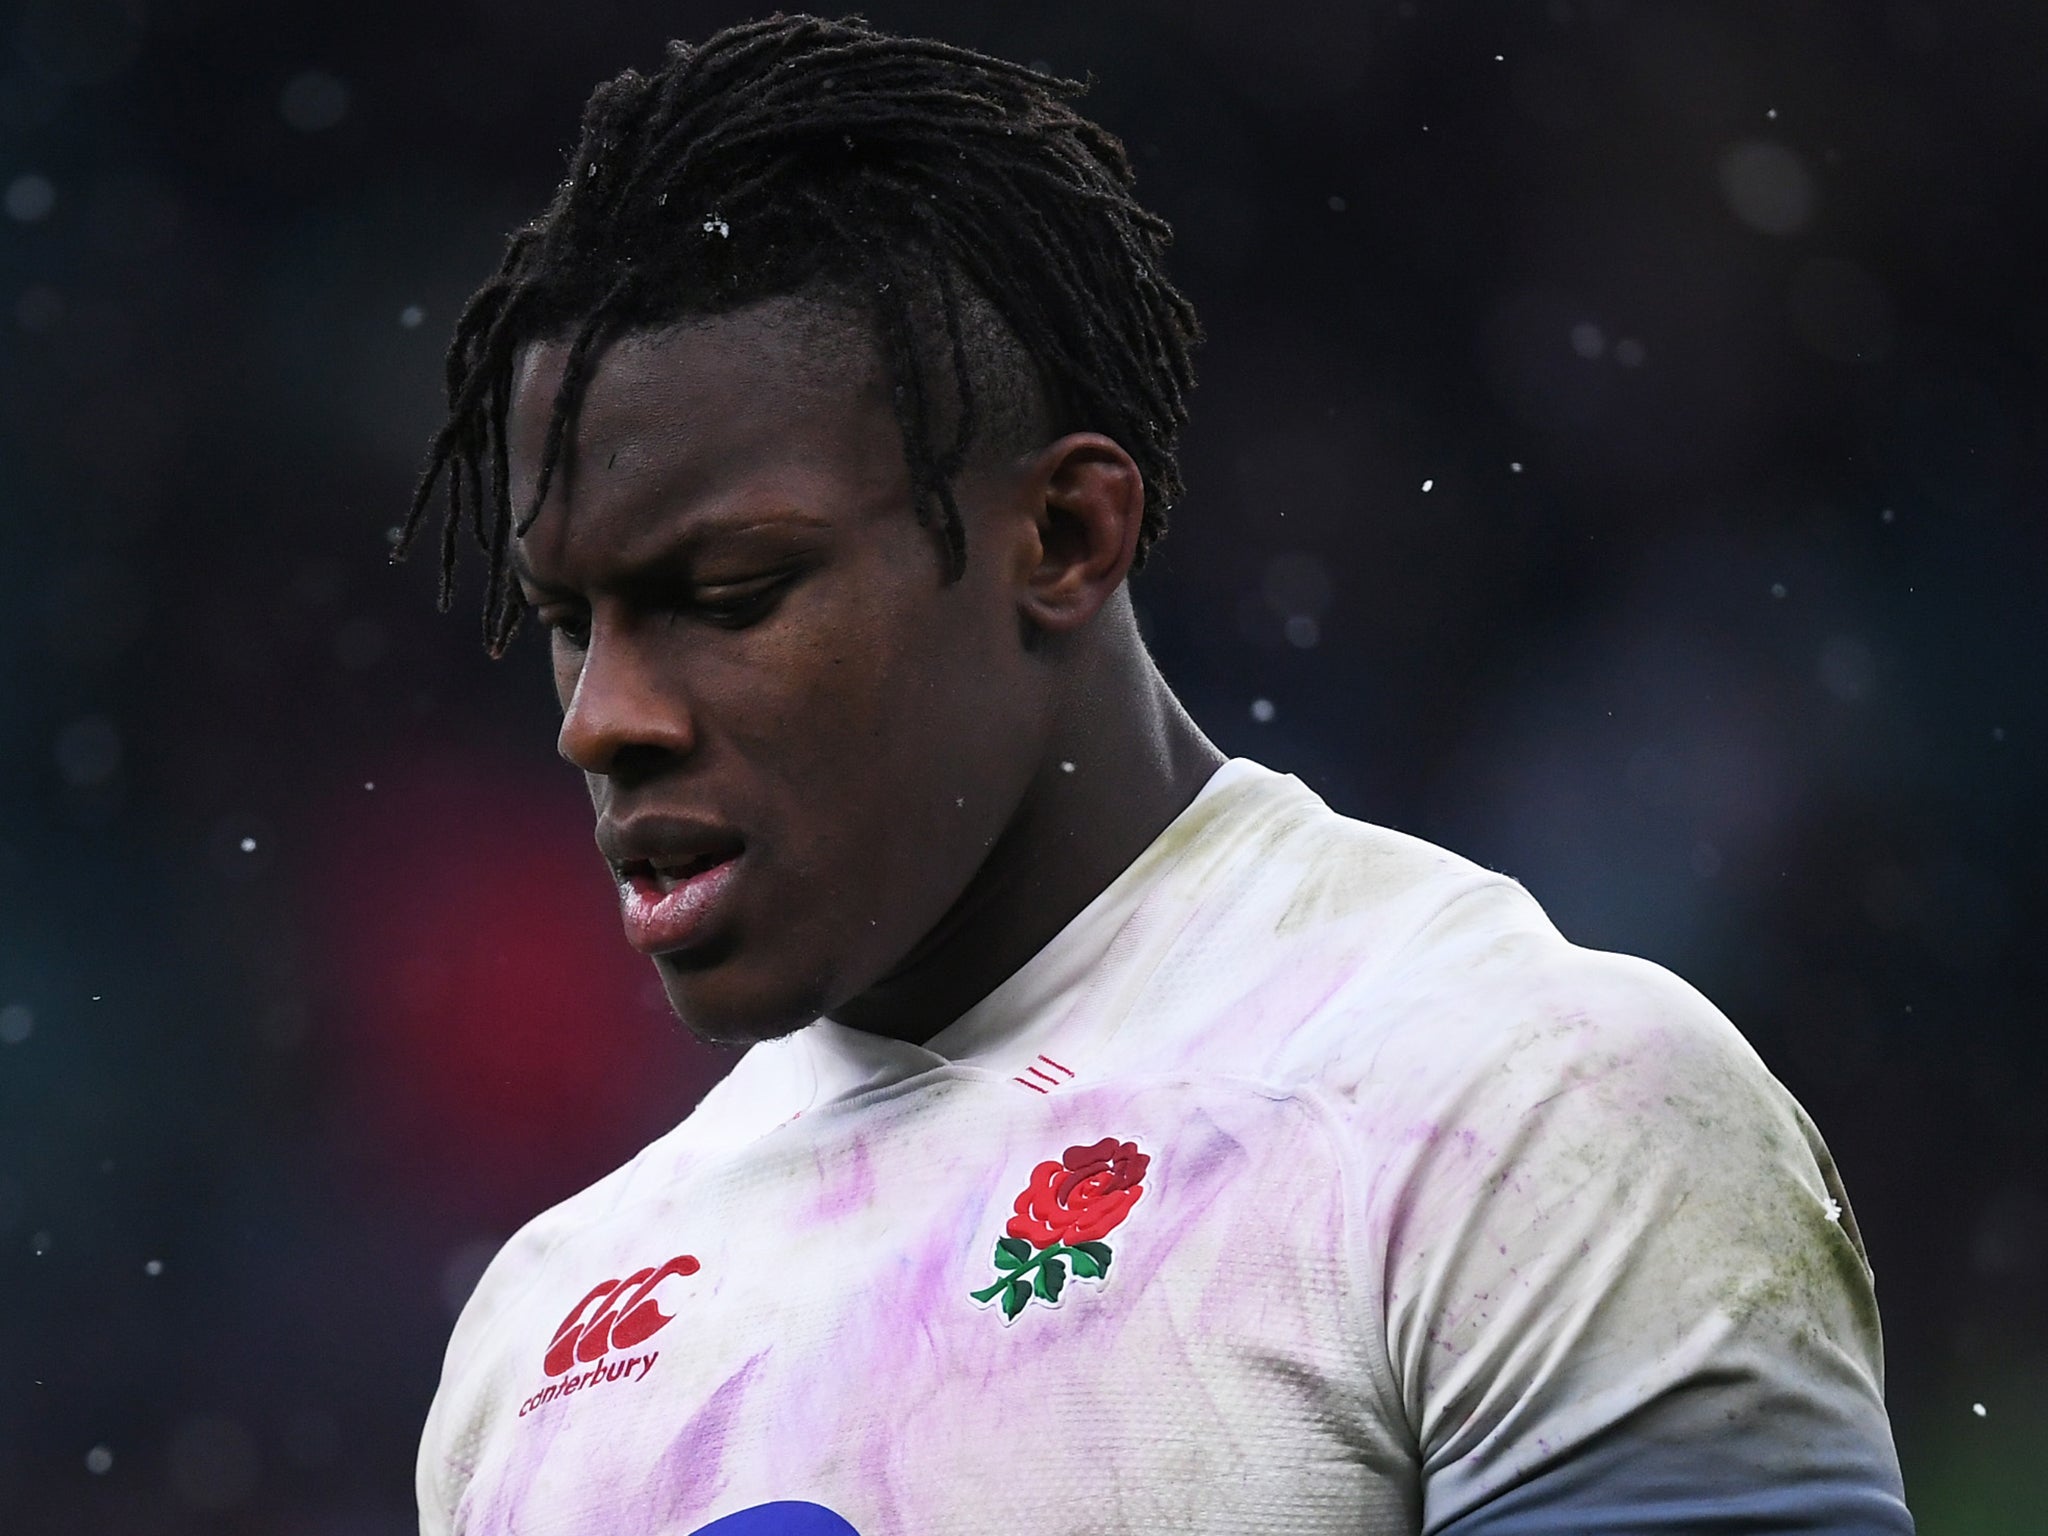 Maro Itoje played every minute of the Six Nations for England yet starts for Saracens